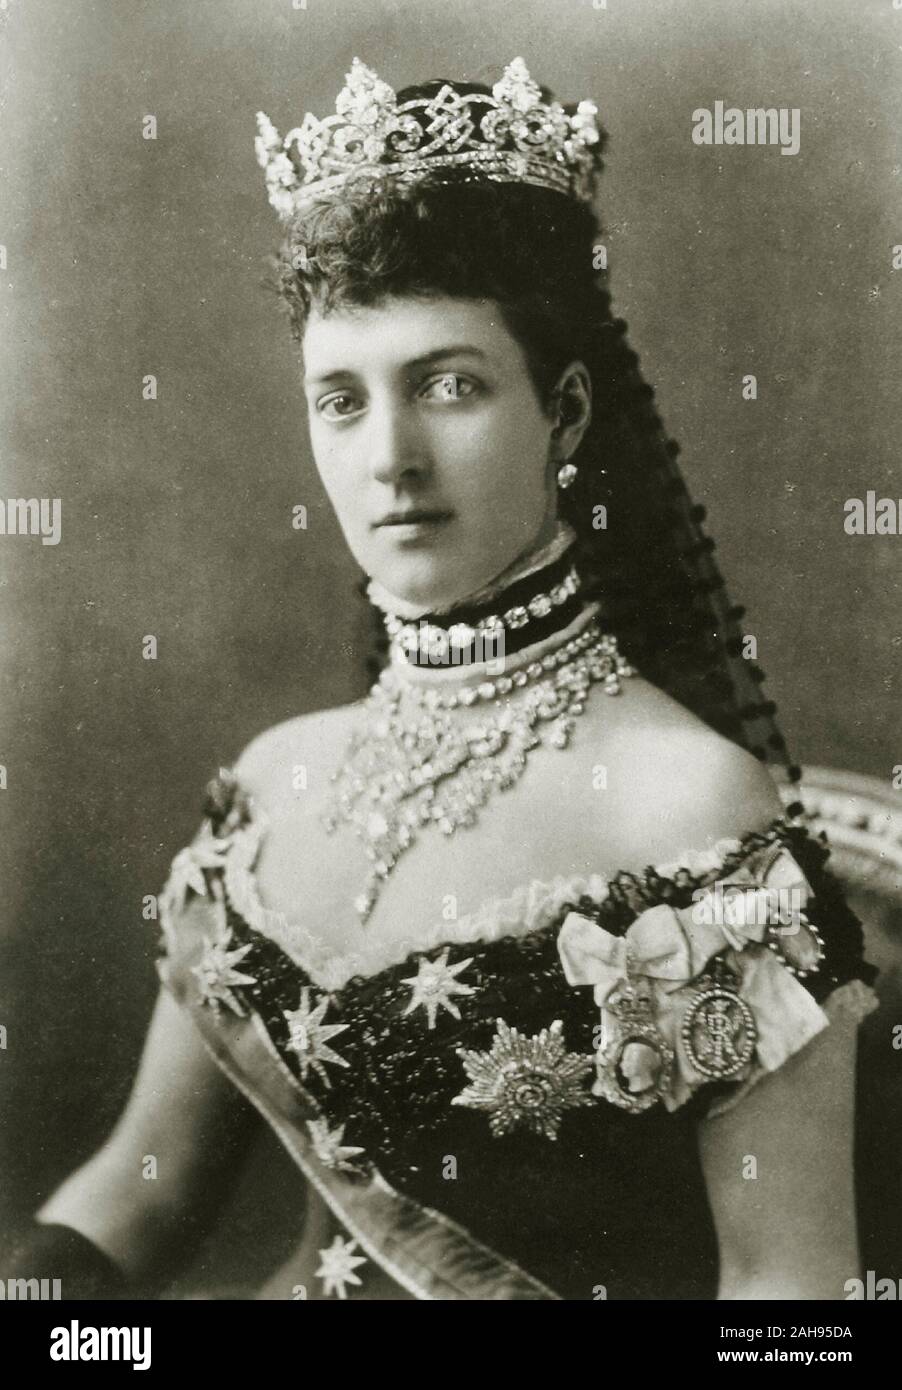 Alexandra of Denmark, Princess of Wales, later Queen consort of the United Kingdom. May 1881 Stock Photo